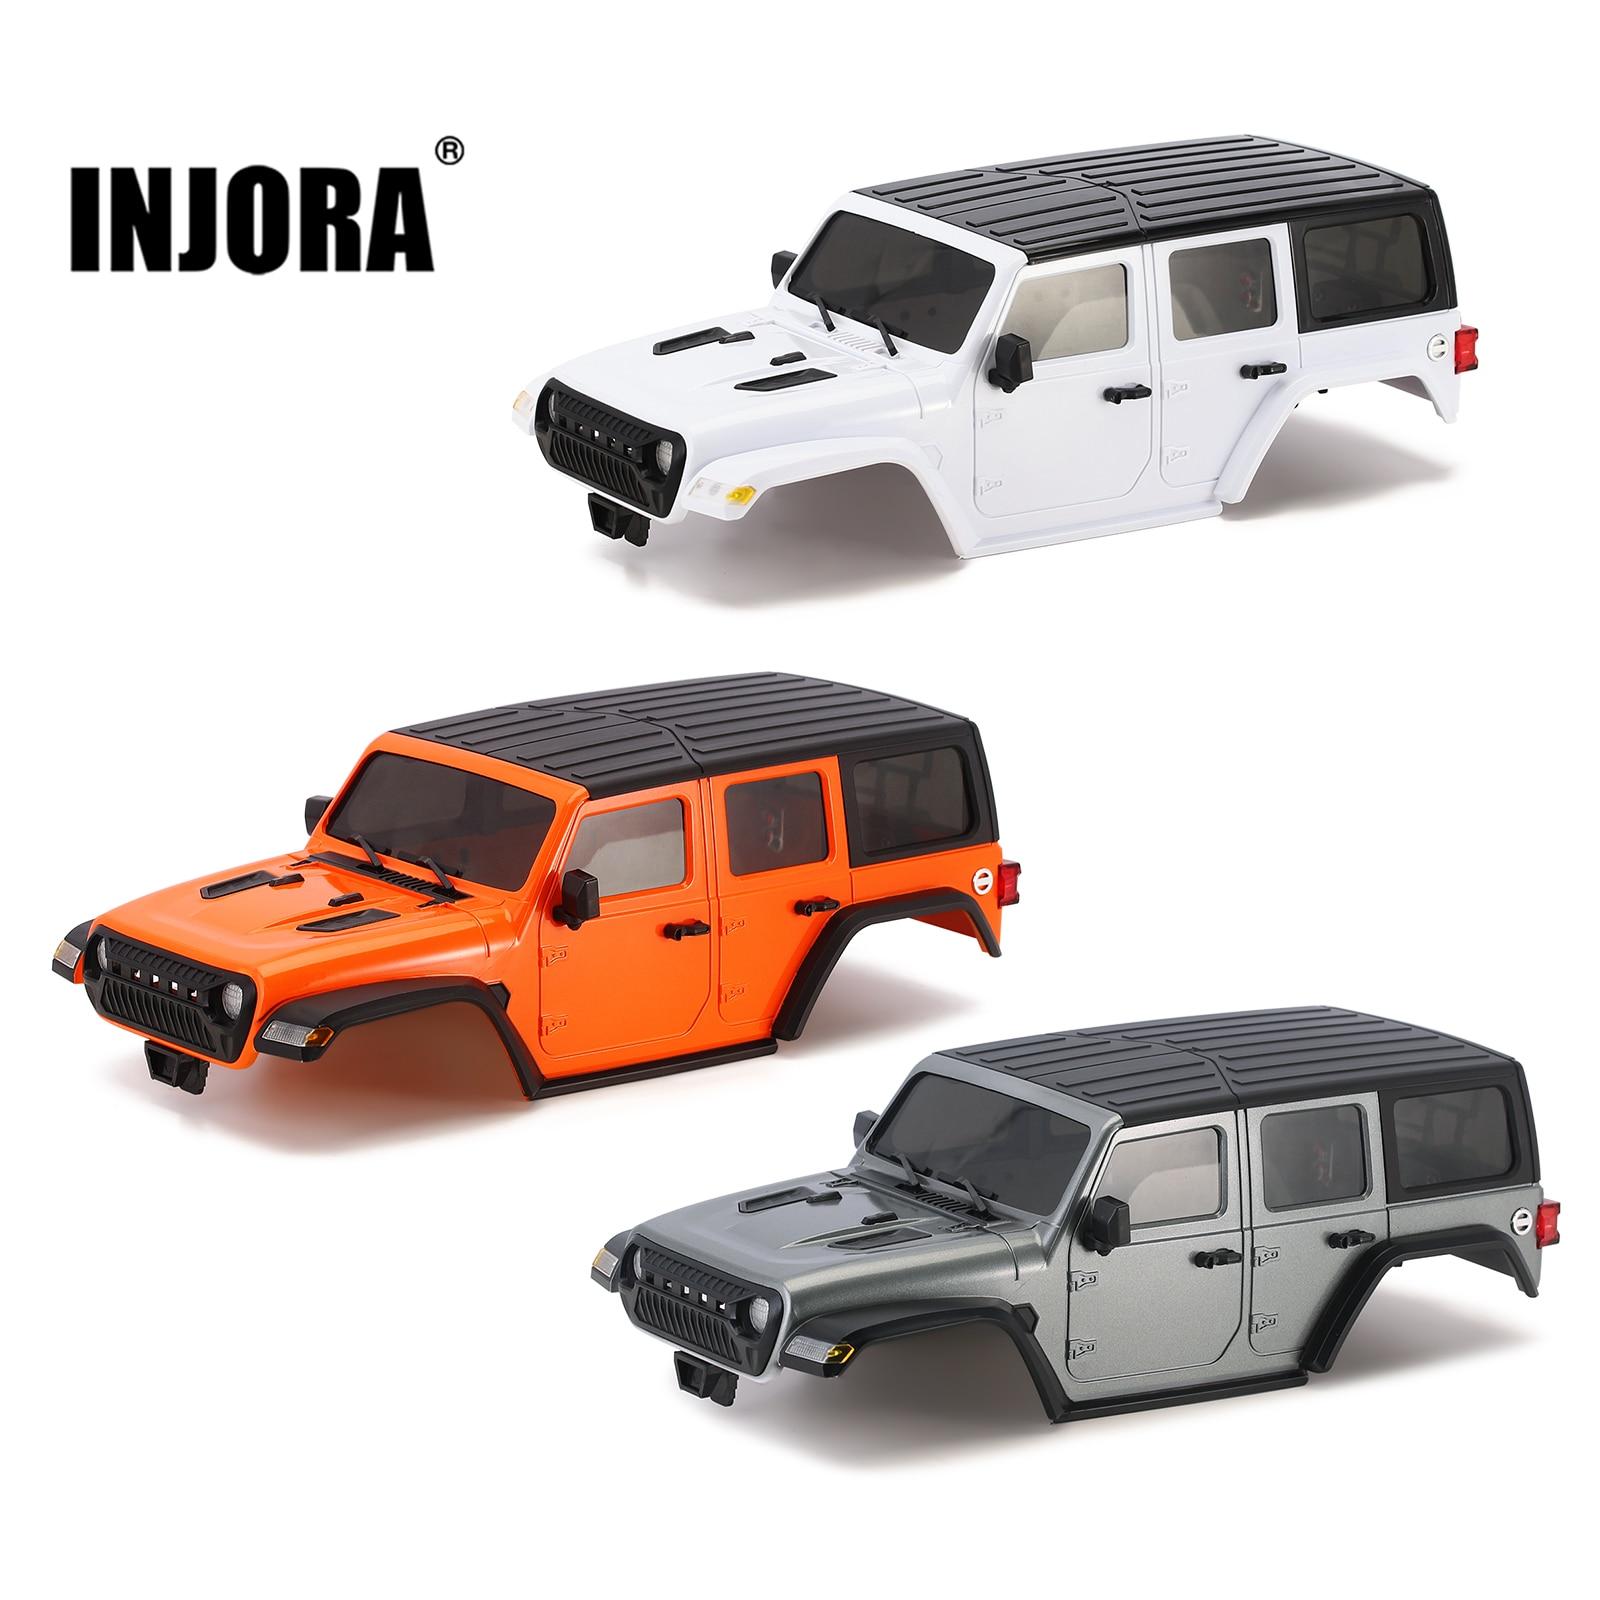 INJORA-6-10in-Wheelbase-ABS-Hardtop-Body-Kit-with-Front-Rear-Bumpers-for-1-18-RC.jpg